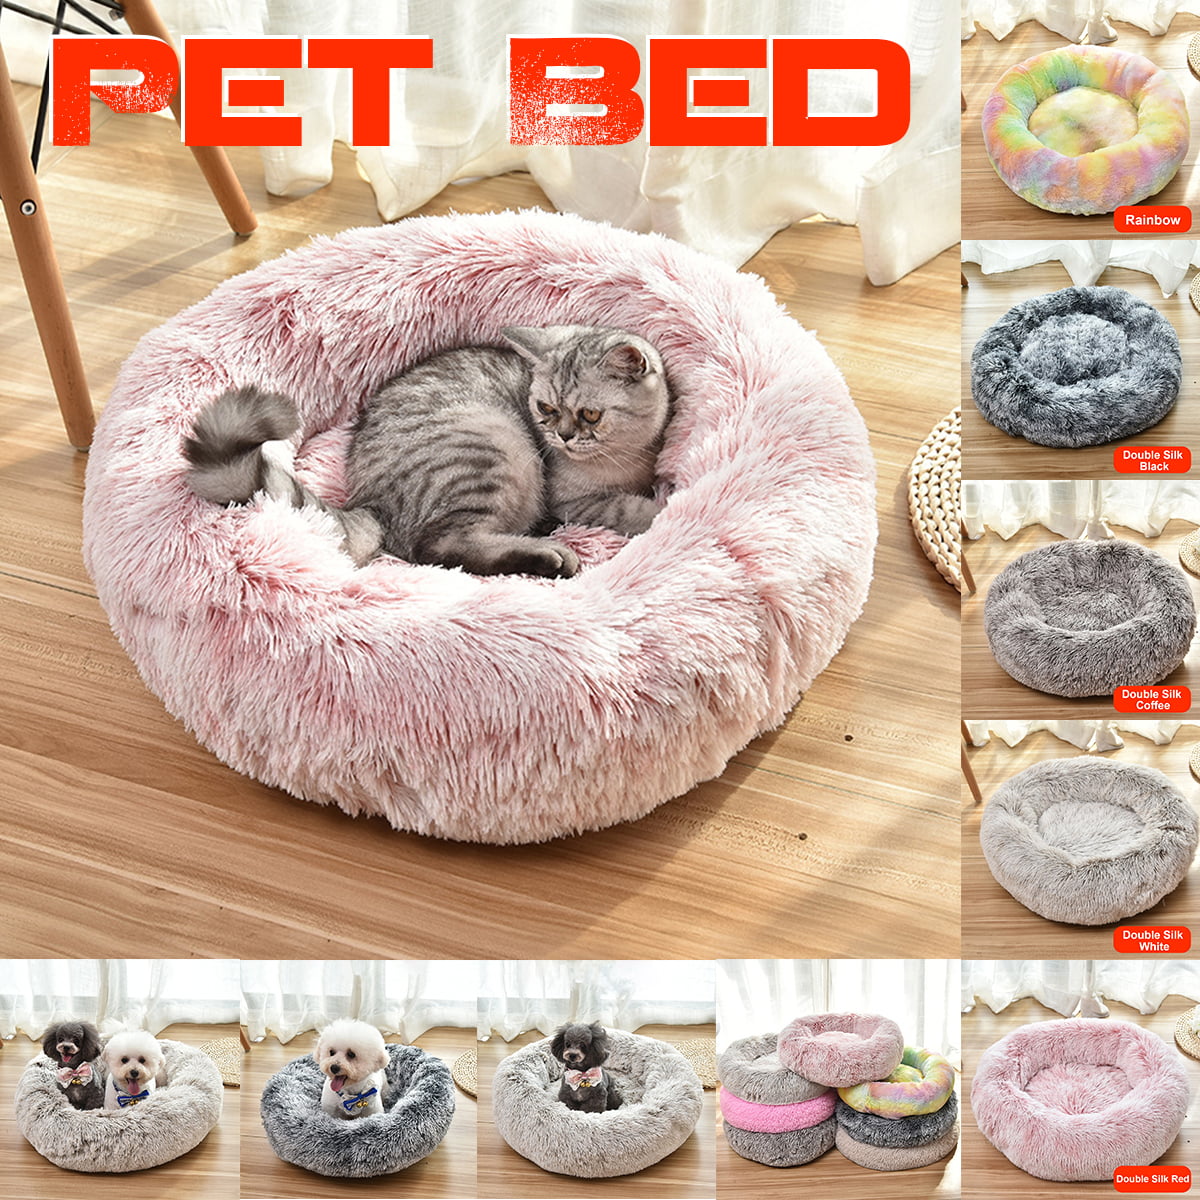 Mosunx Dog Cat Calming Bed Pet Plush Bed Round Self-Warming and Improved Sleep Soft Donut Cushion Bed Best Friend for Dogs and Cats 